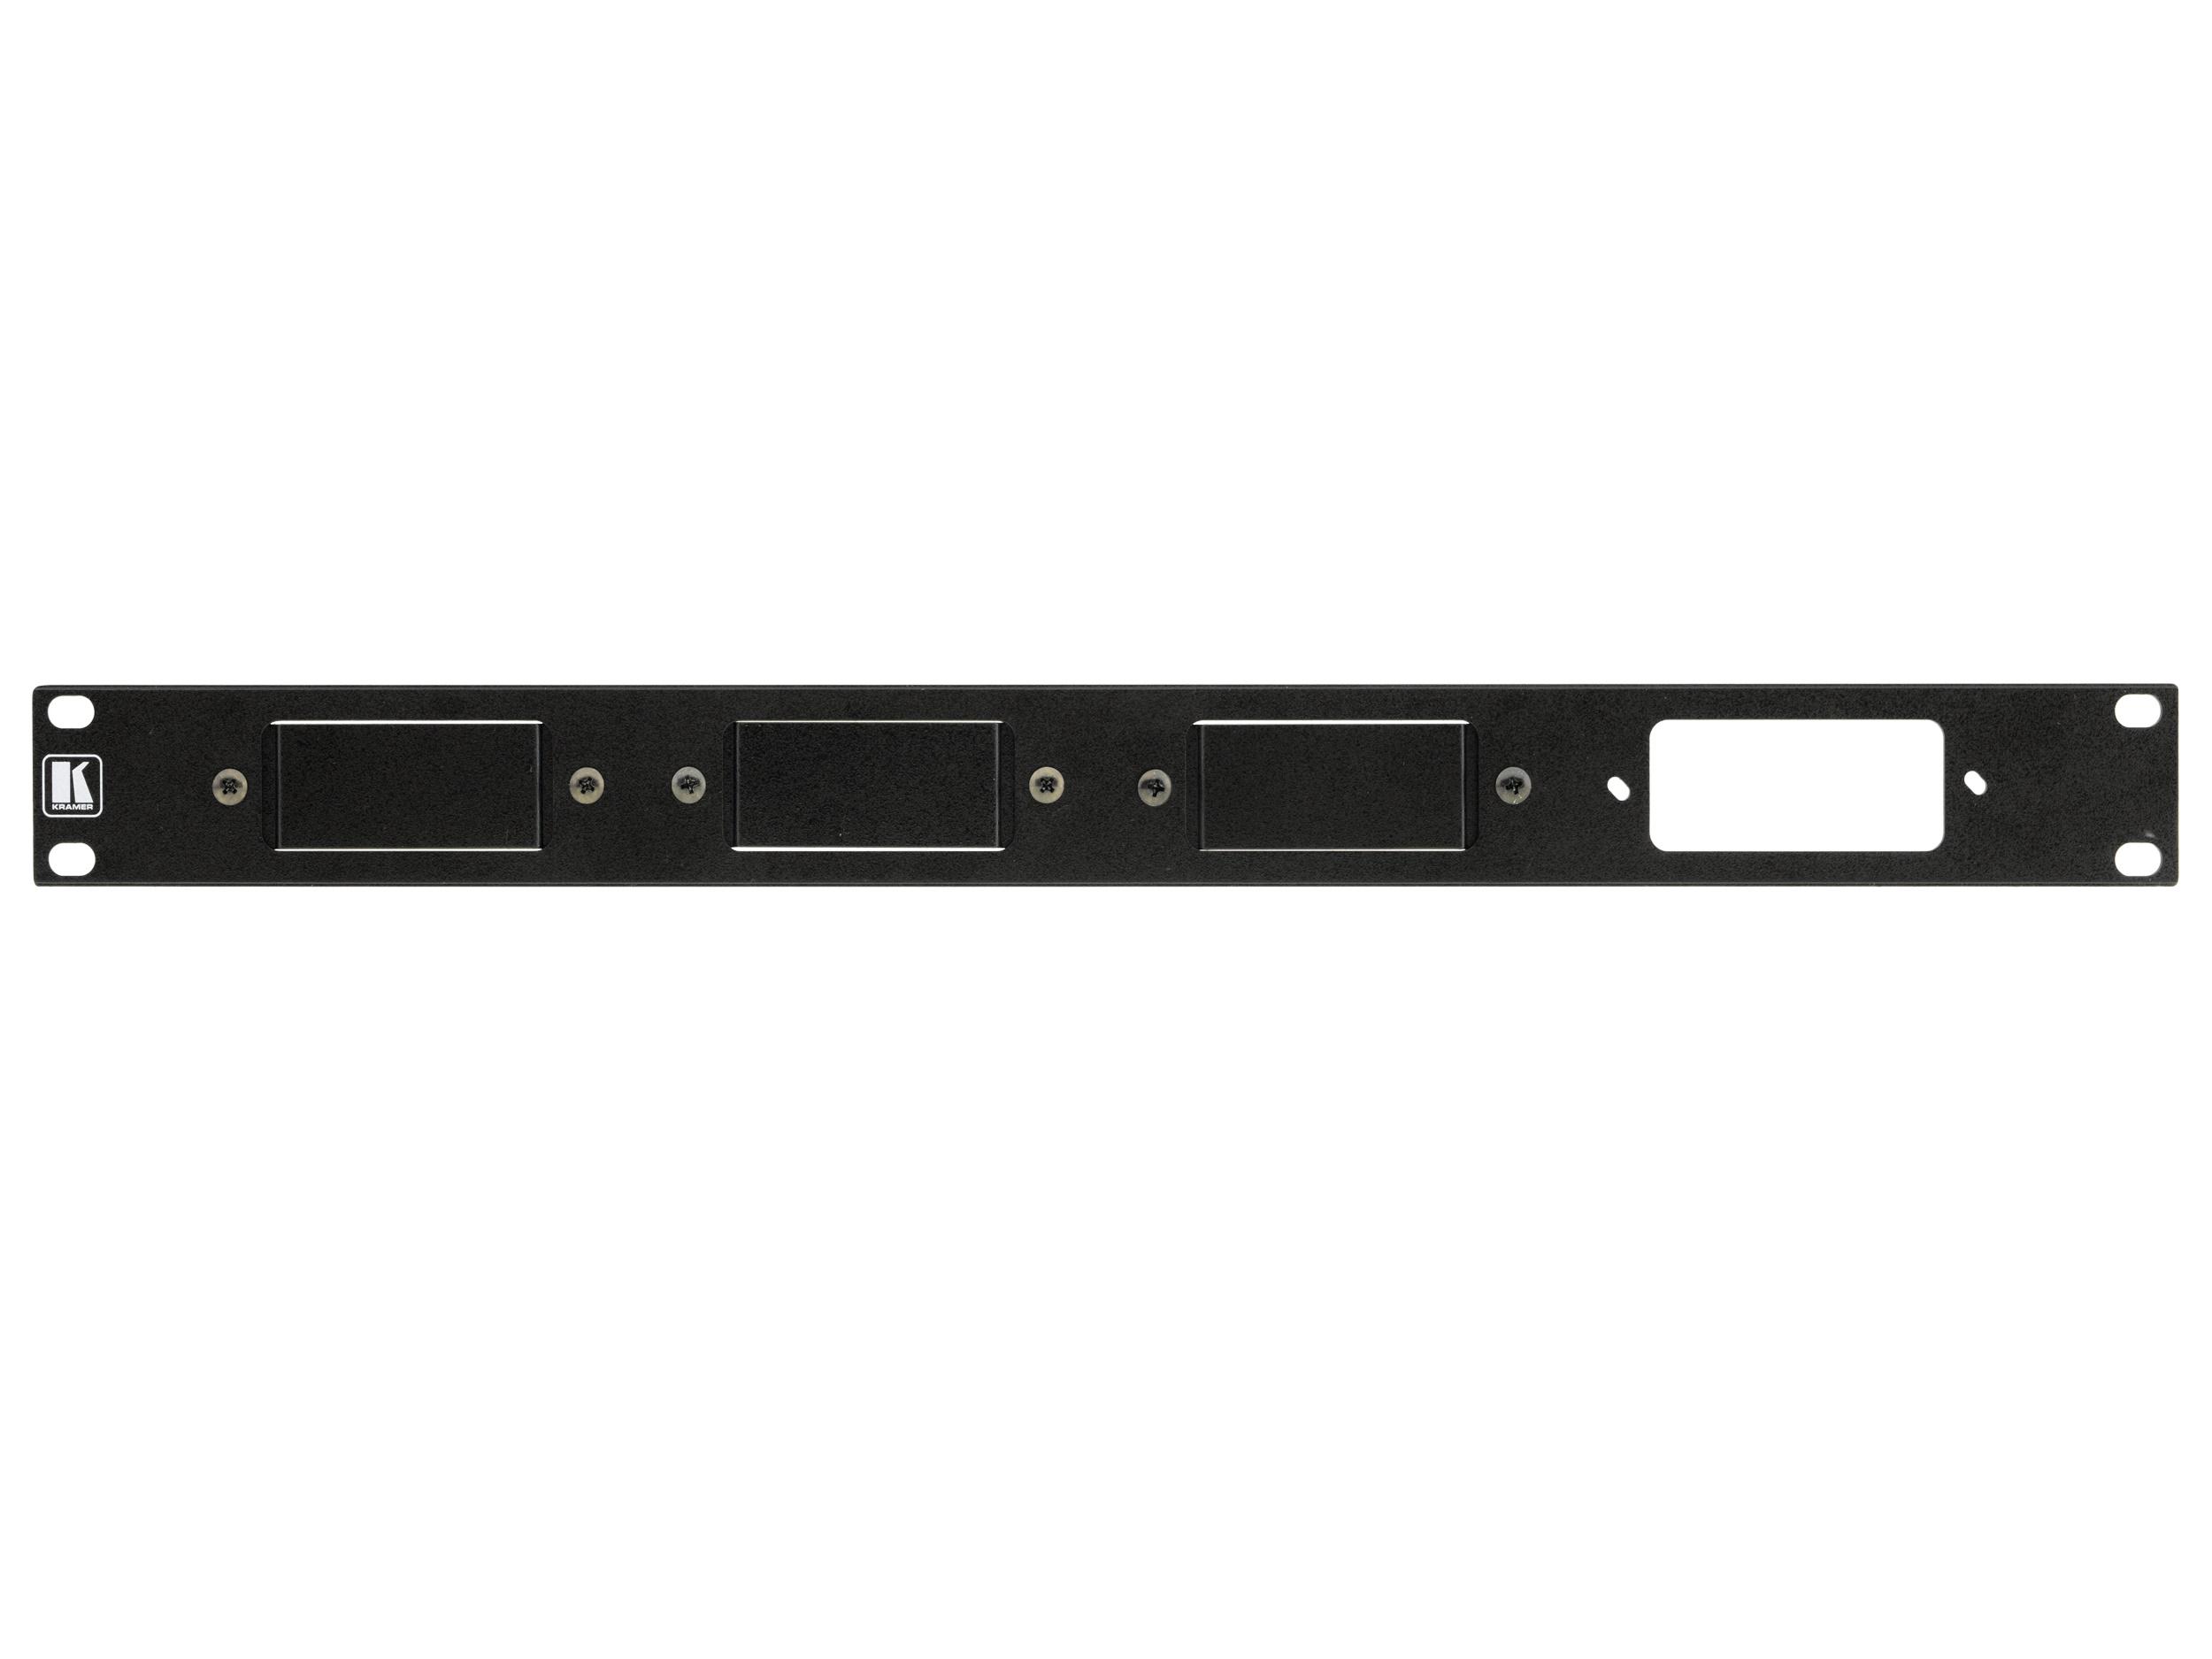 RK-4PT-B 19-Inch Rack Adapter for Pico TOOLS by Kramer